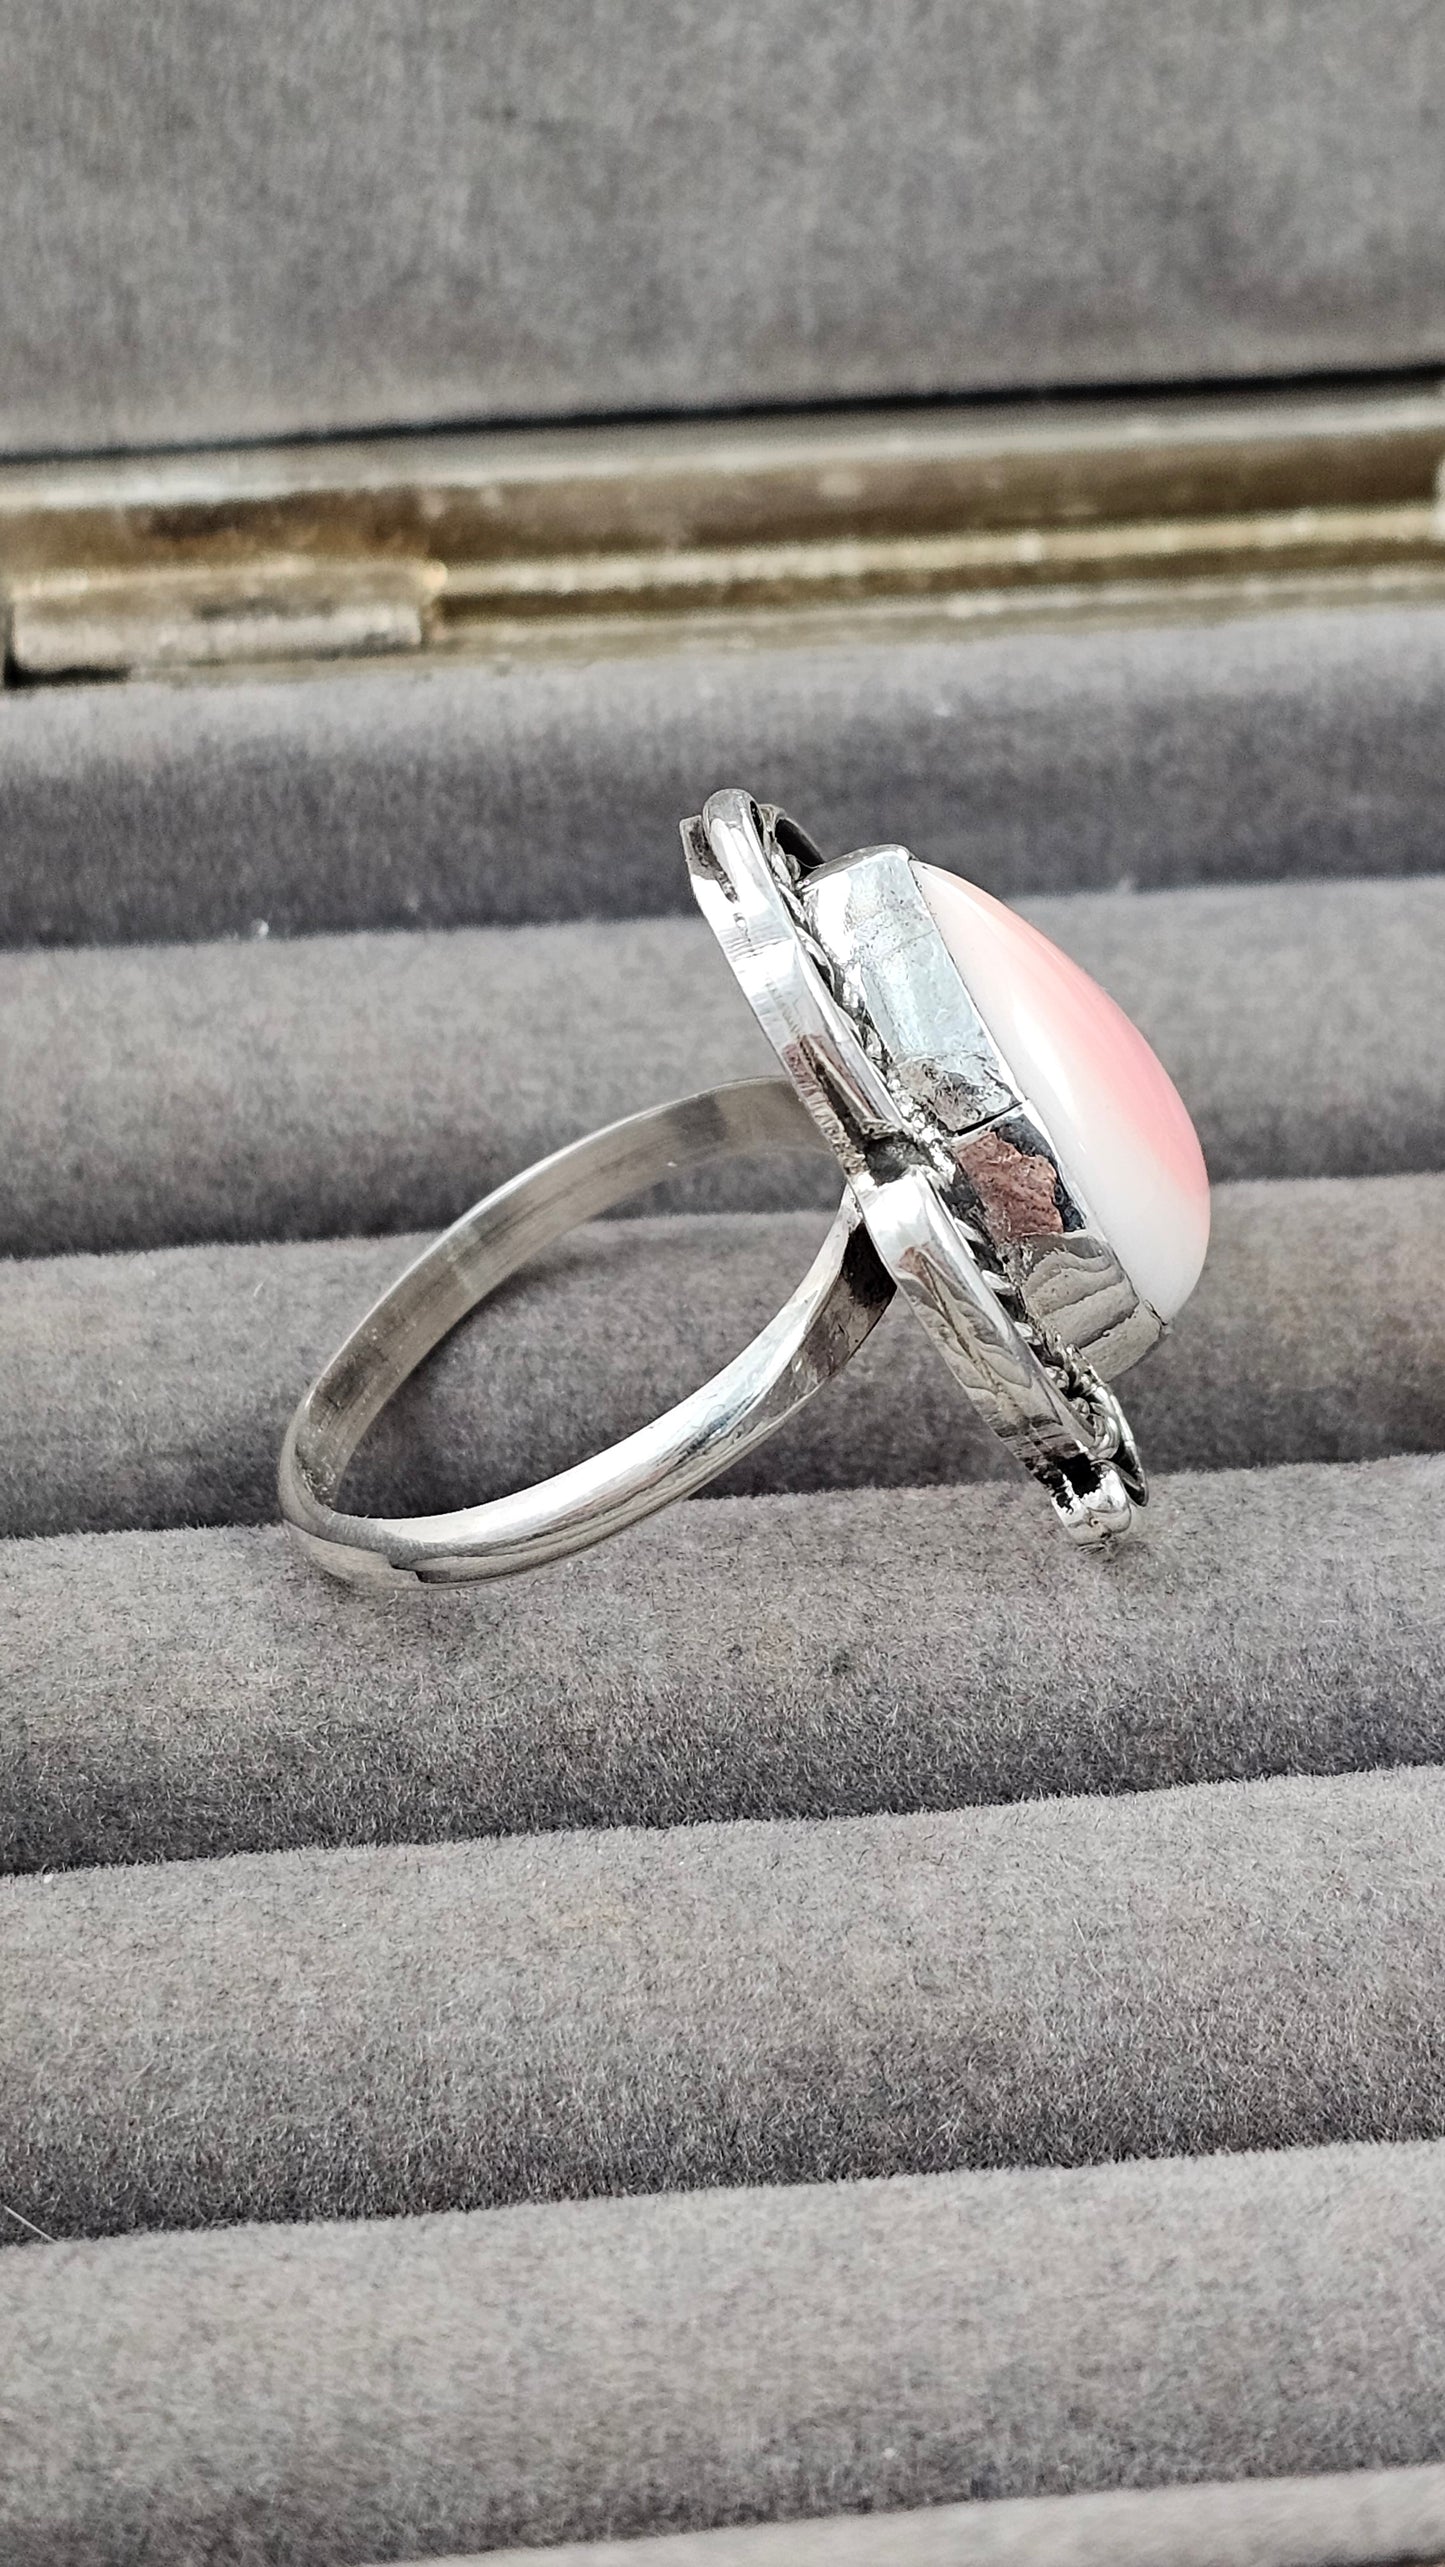 Pink conch shell ring